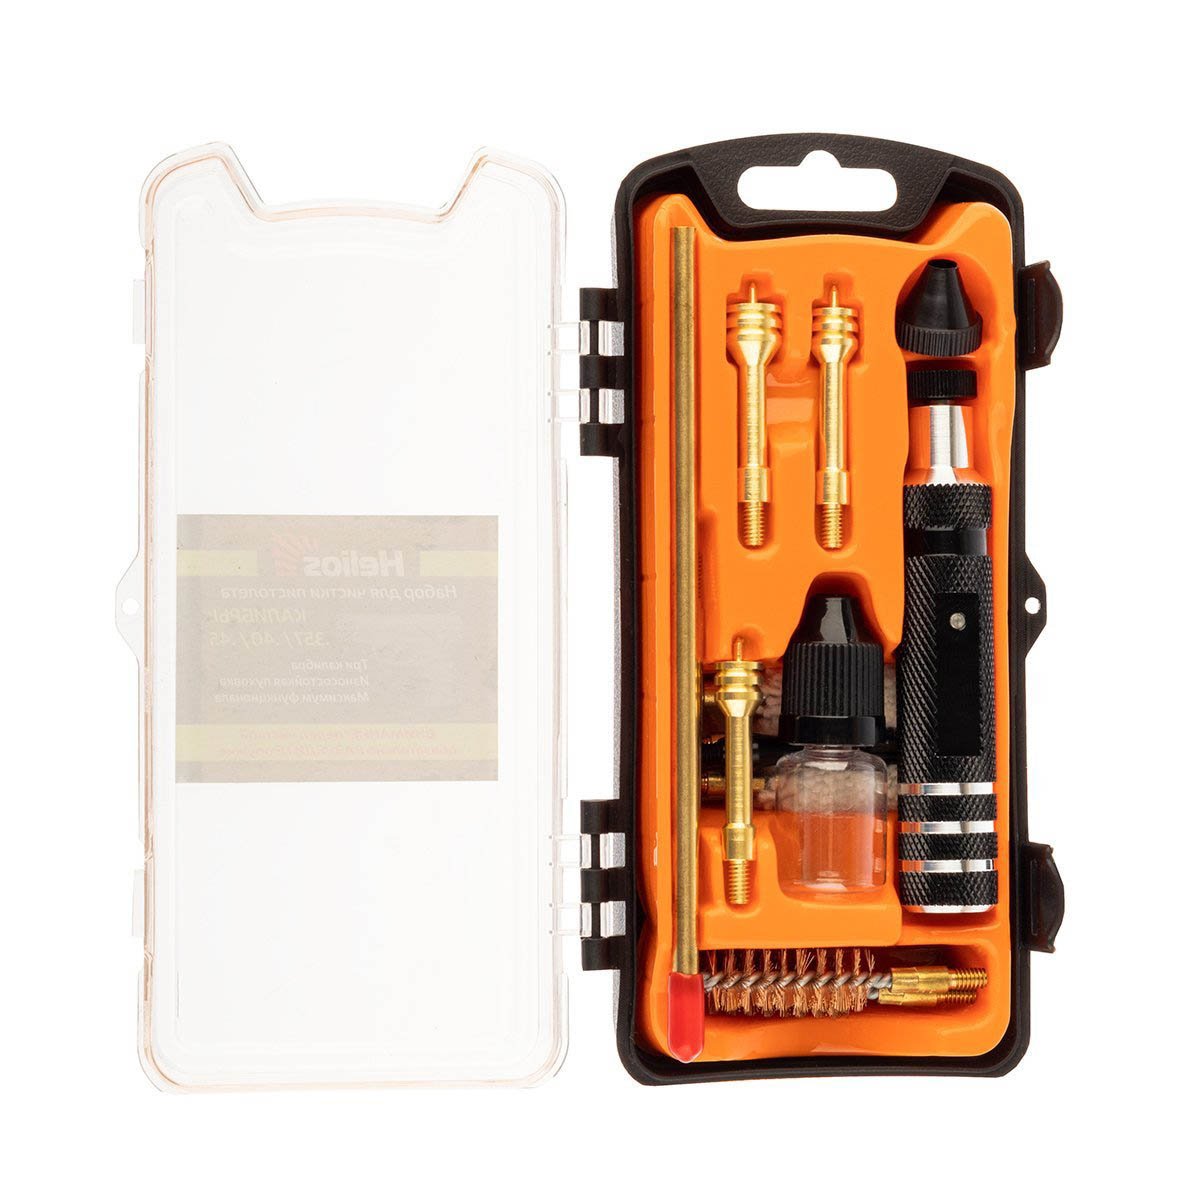 Gun Cleaning Kit, .357, .40, .45 Caliber, 14 Items, is compactly packed into a Plastic Case